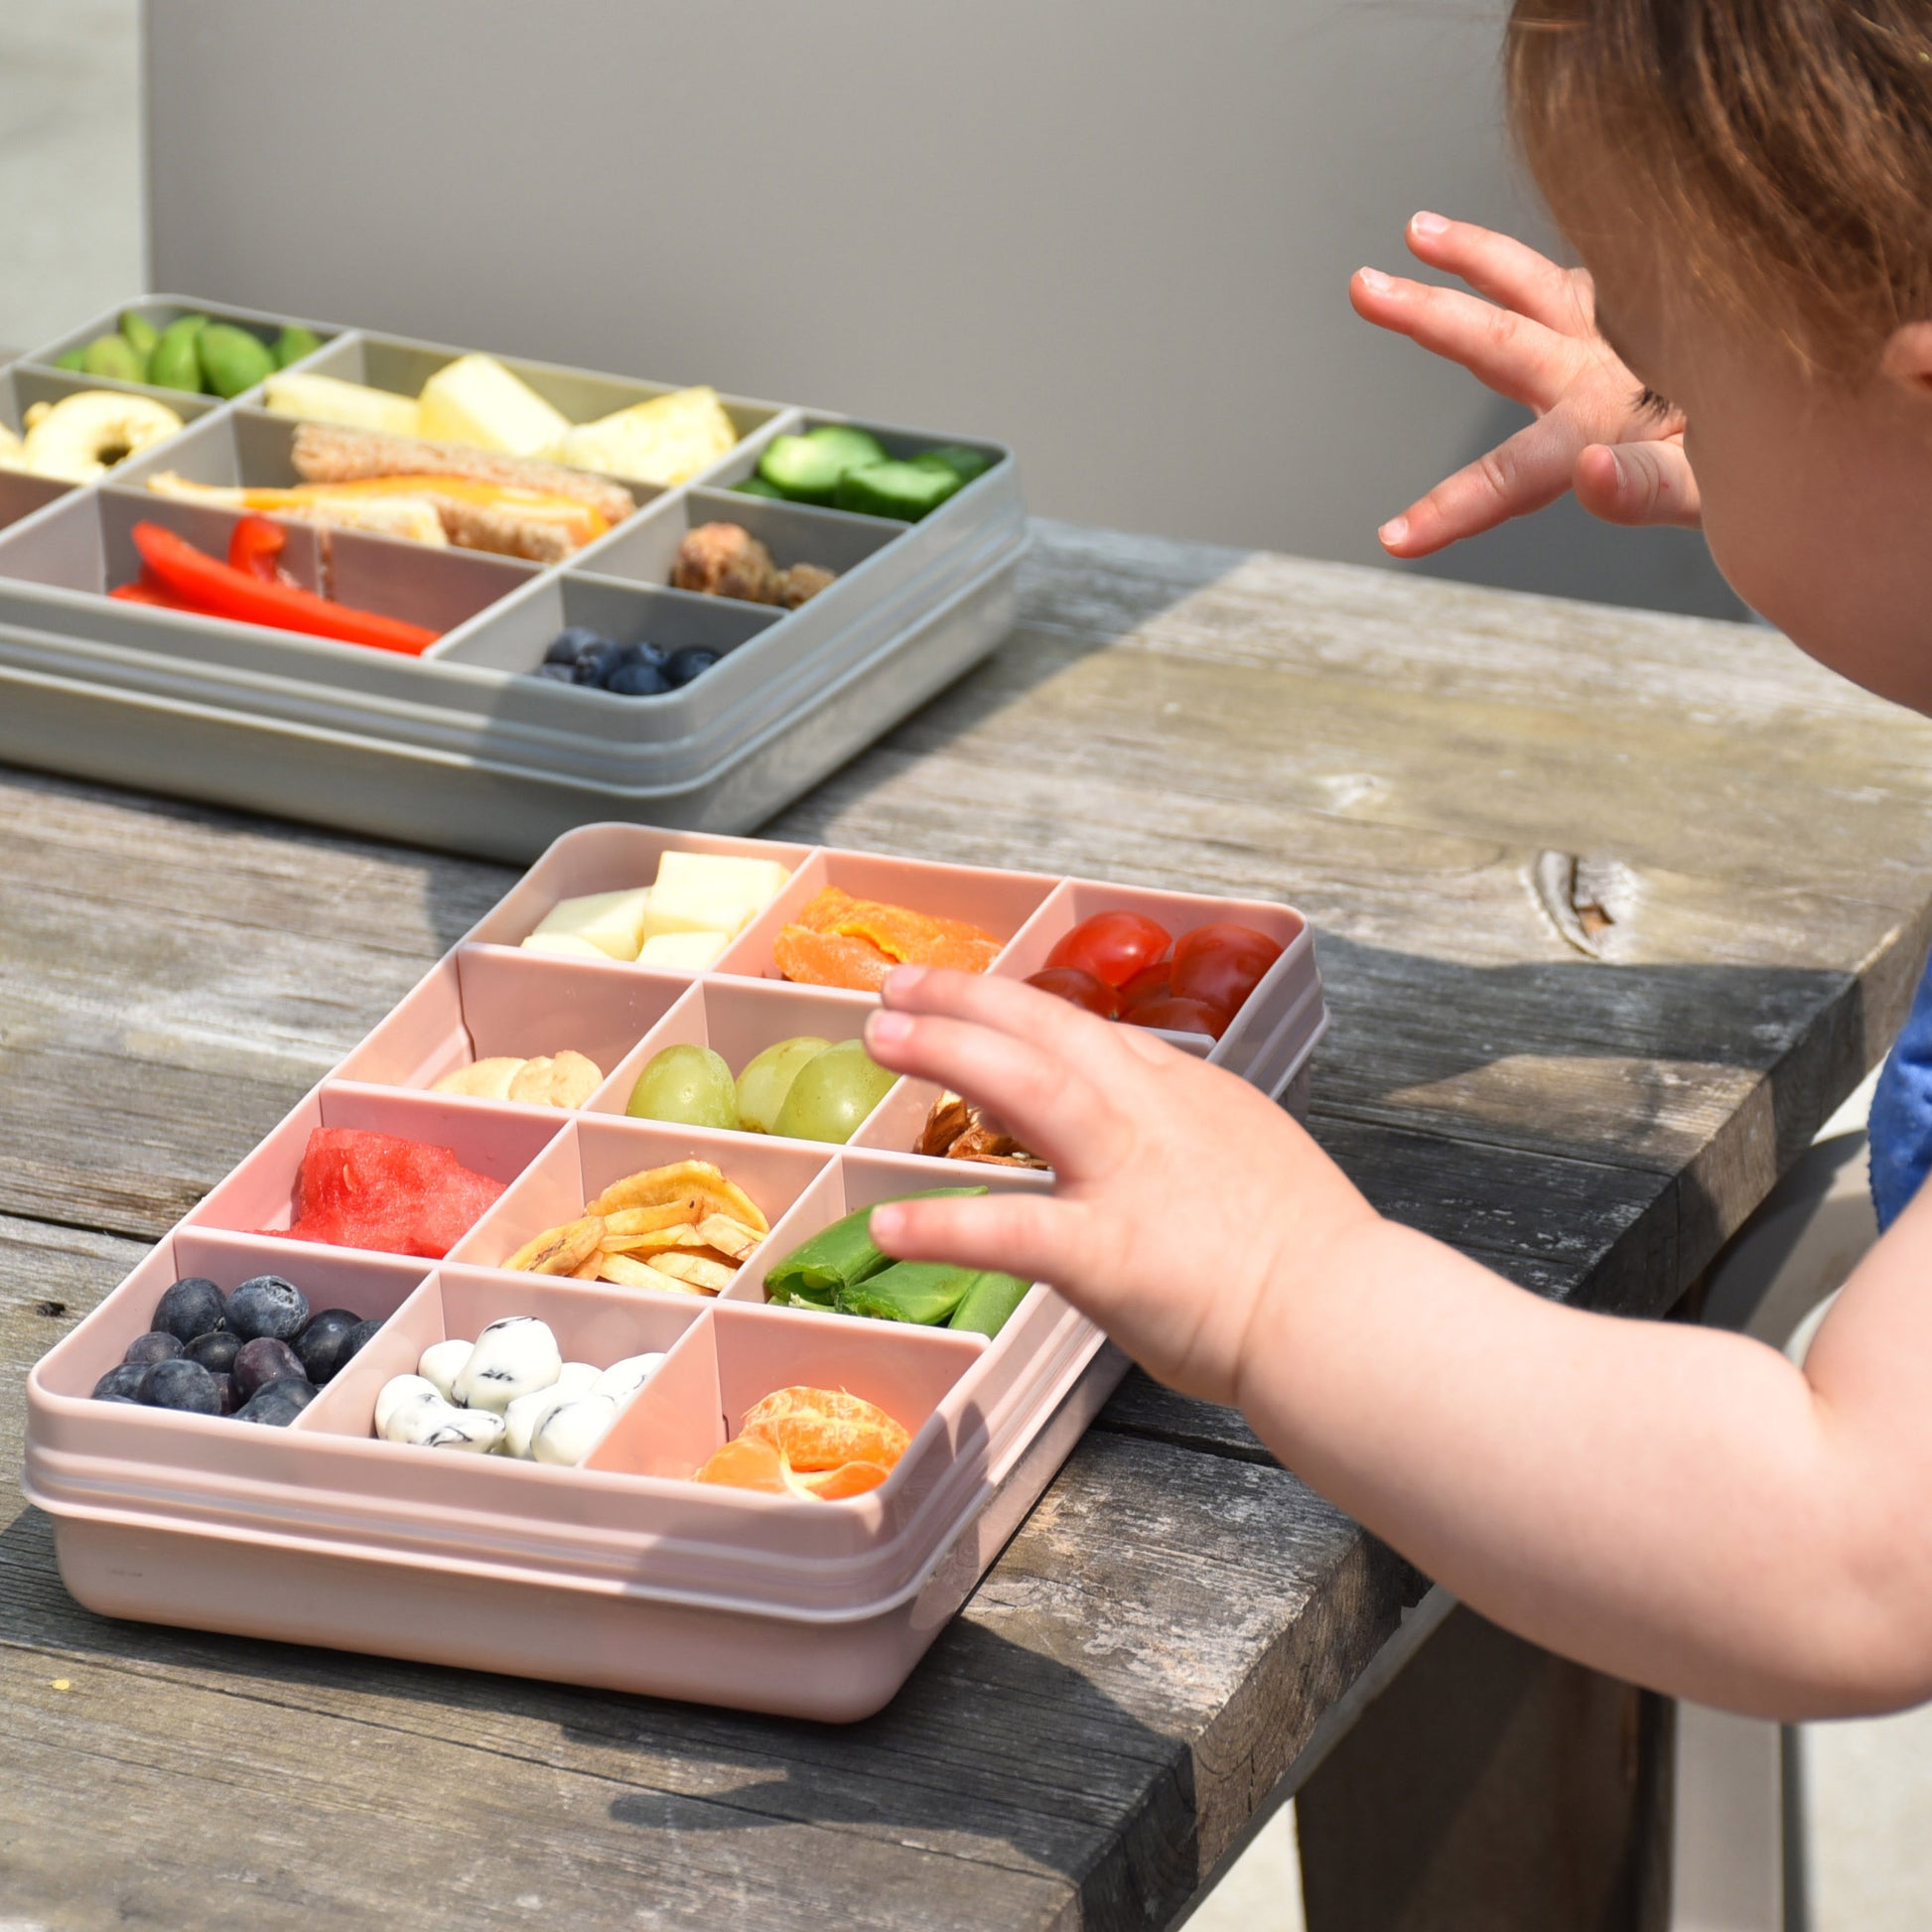 melii Snackle Box Pink - 12 Compartment Snack Container with Removable Dividers for Customizable Storage - Ideal for On the Go Snacking, BPA Free, Easy to Open and Clean